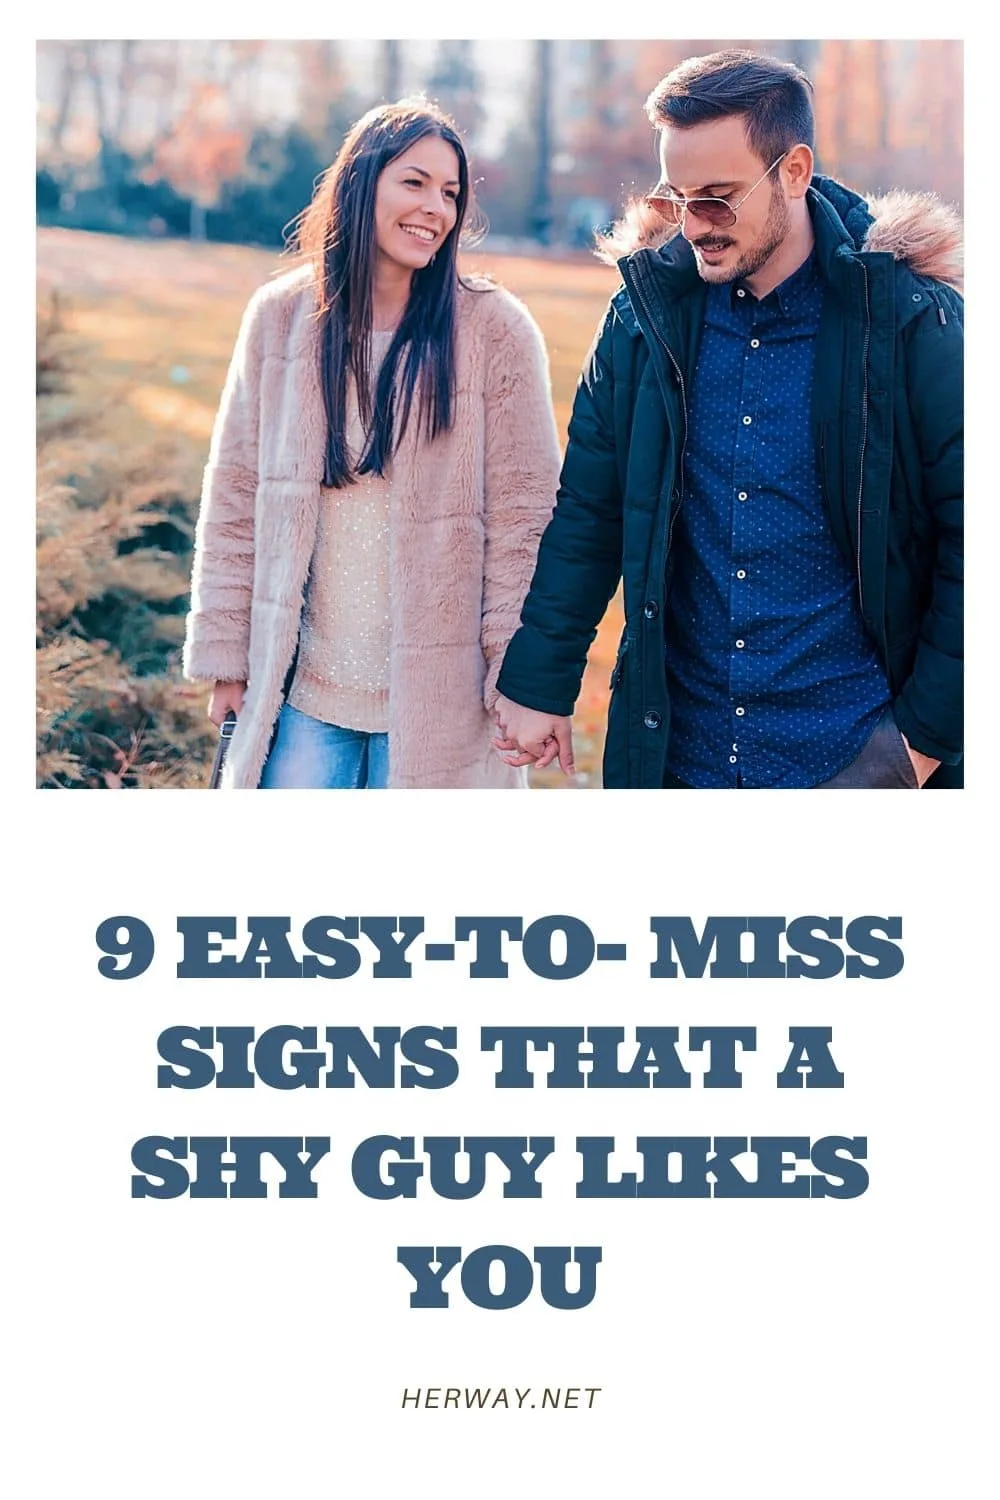 Signs a shy guy likes you